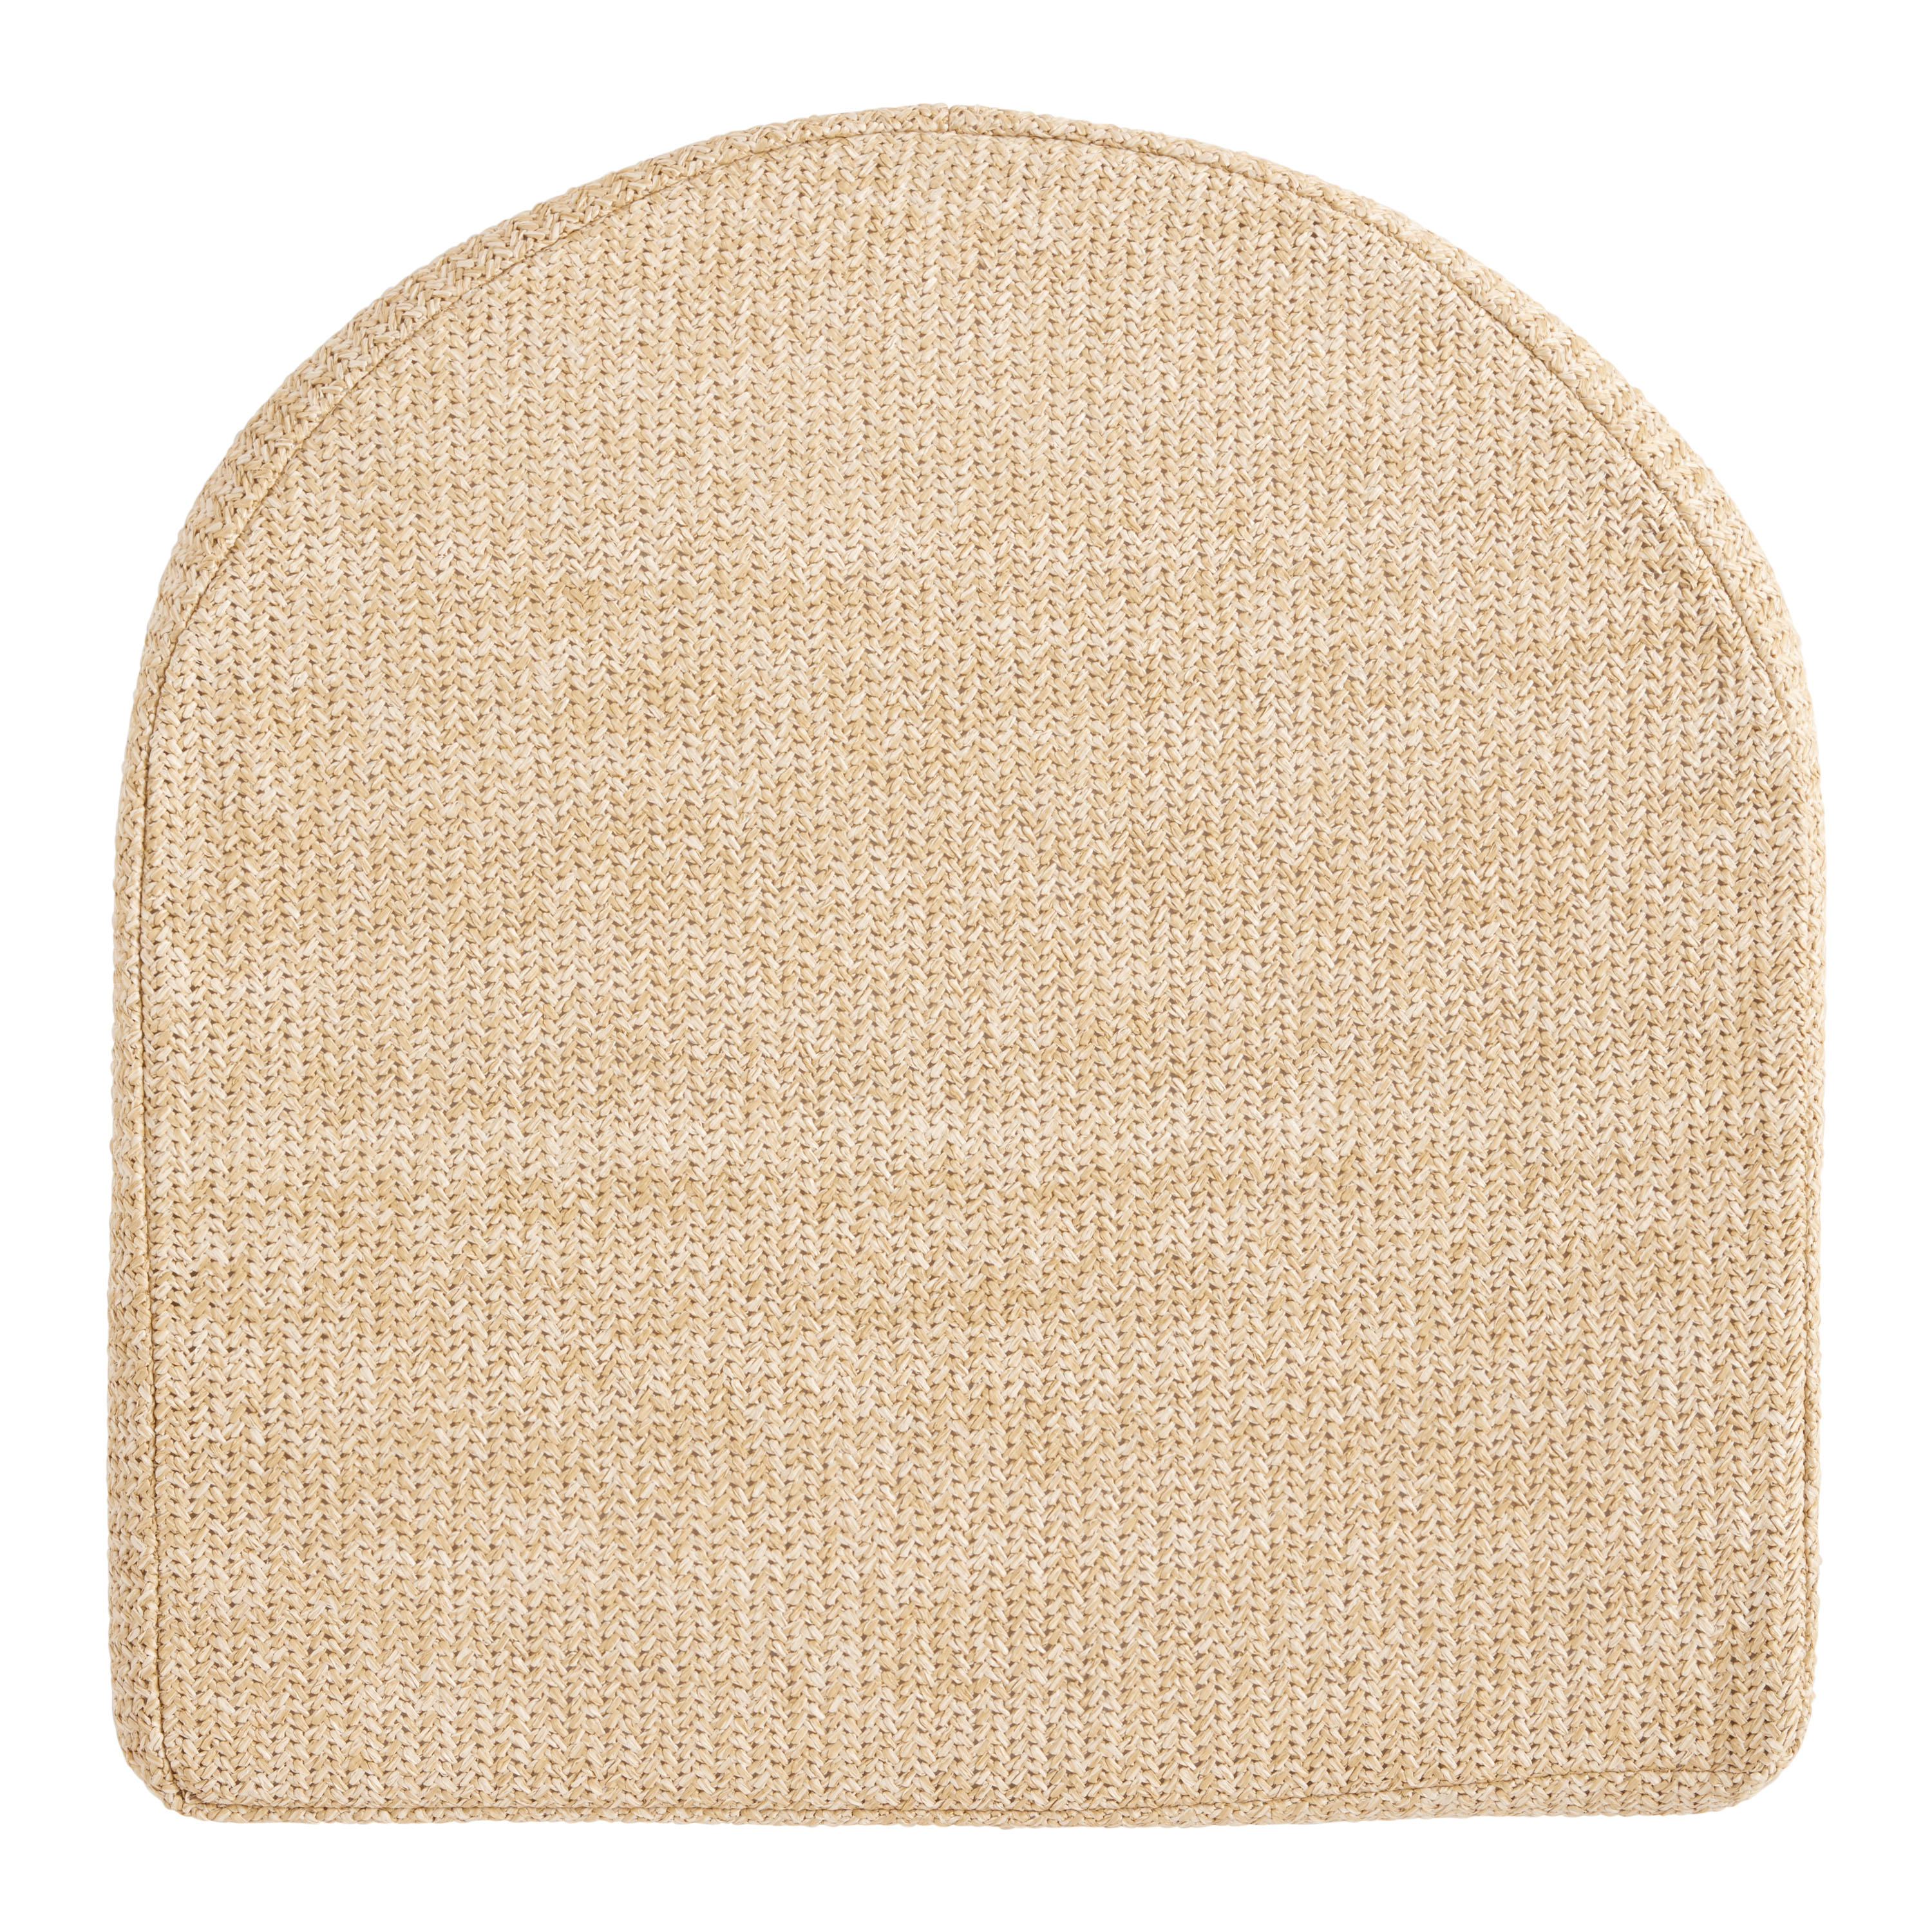 Natural Textured Outdoor Patio Chair Cushion by World Market